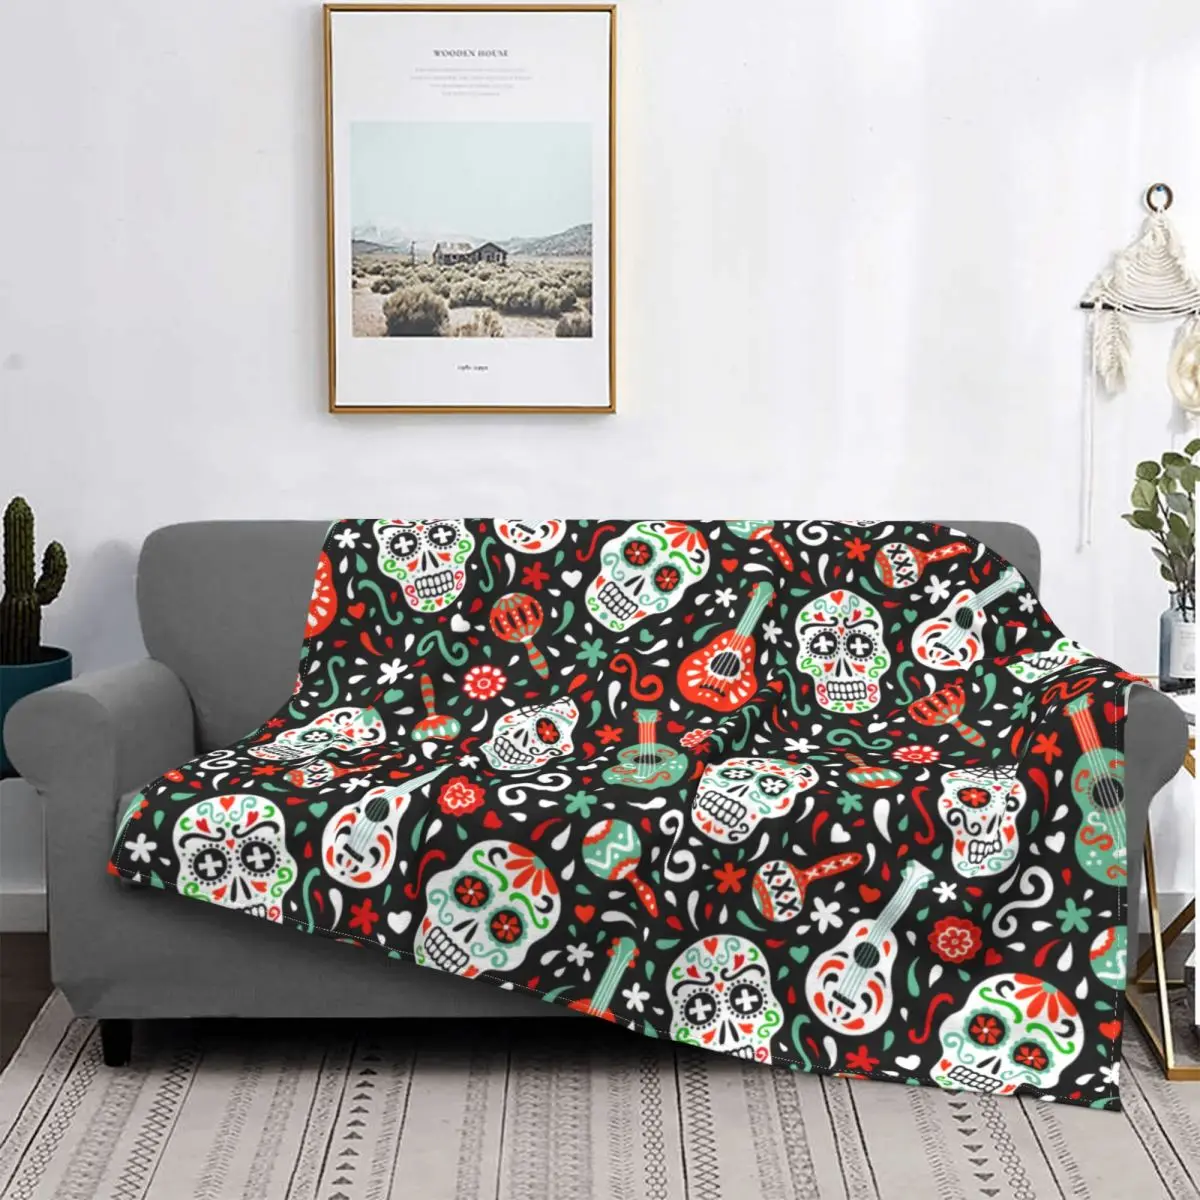 

Mexican Sugar Skull Mandala Art Blanket Soft Fleece Day of the Dead Throw Blankets for Sofa Office Bed Quilt Warm Flannel